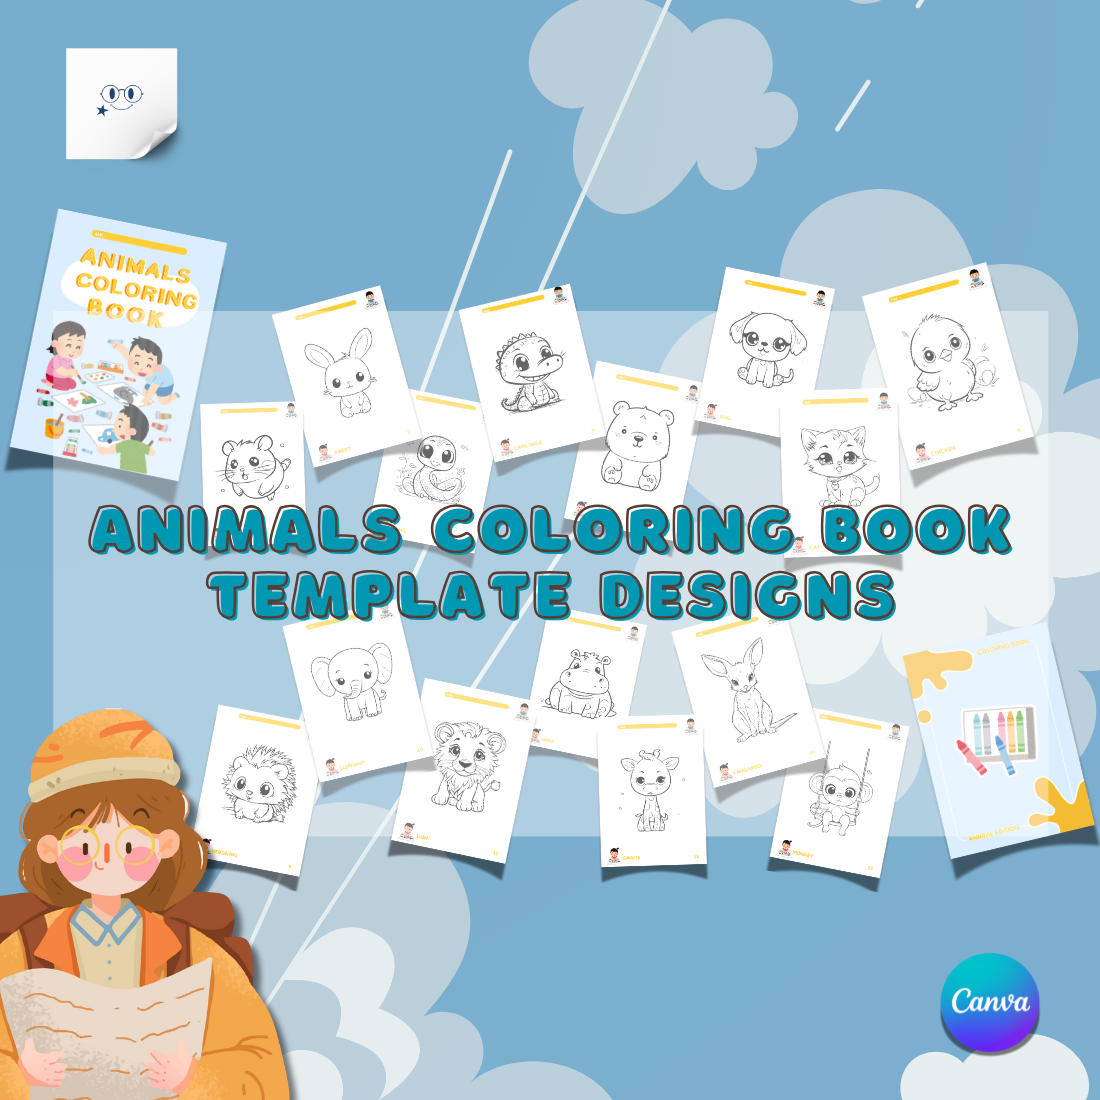 Adorable Animals Coloring Book for Kids - Only 5 cover image.